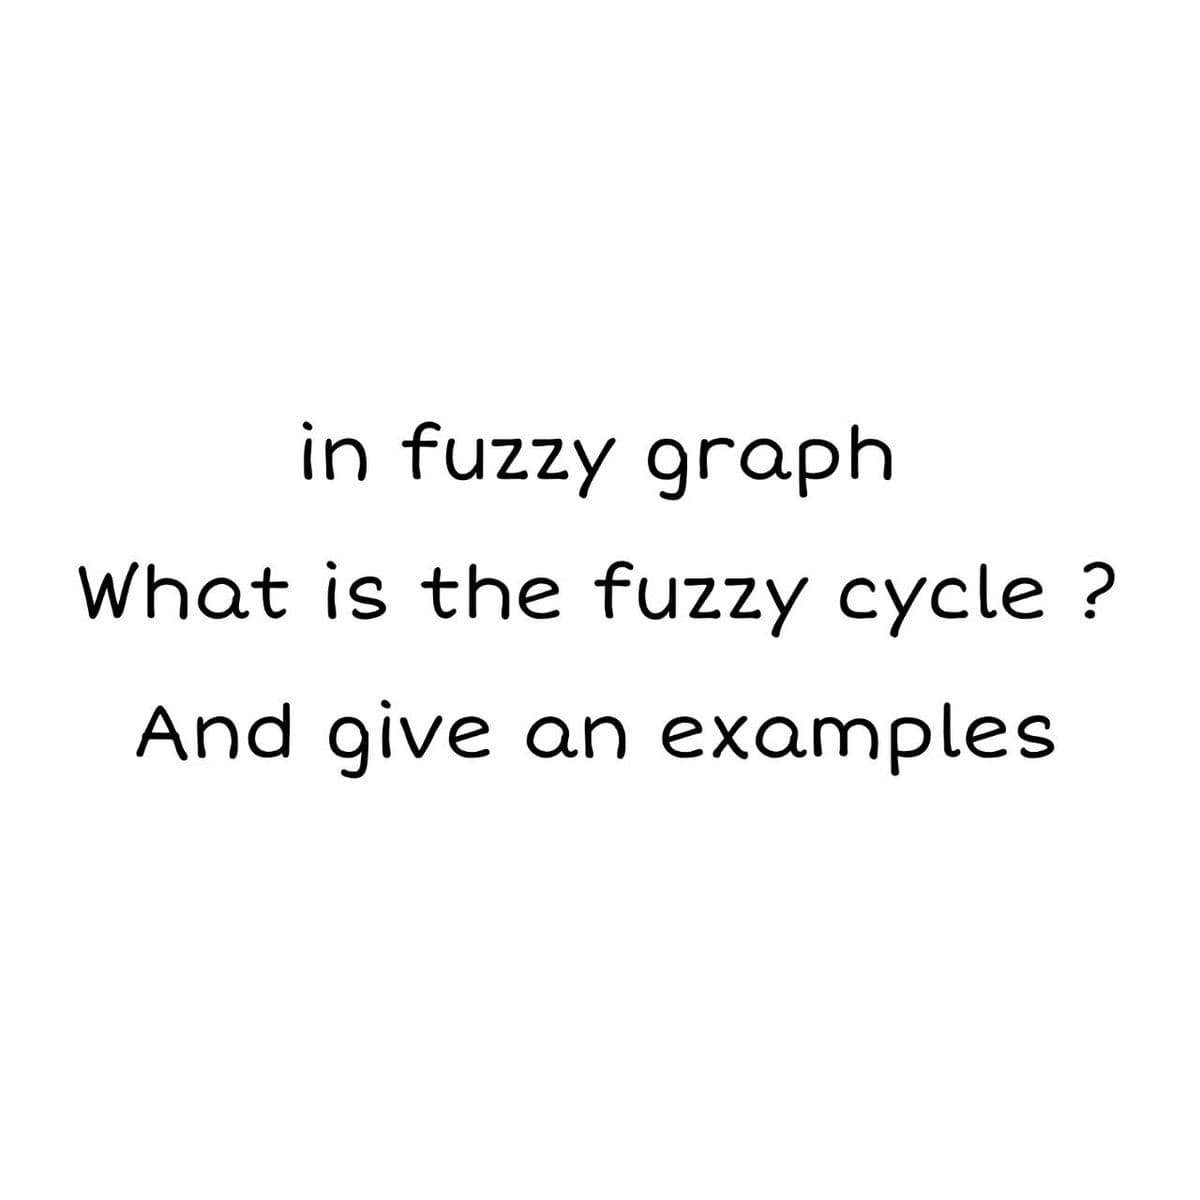 in fuzzy graph
What is the fuzzy cycle ?
And give an examples